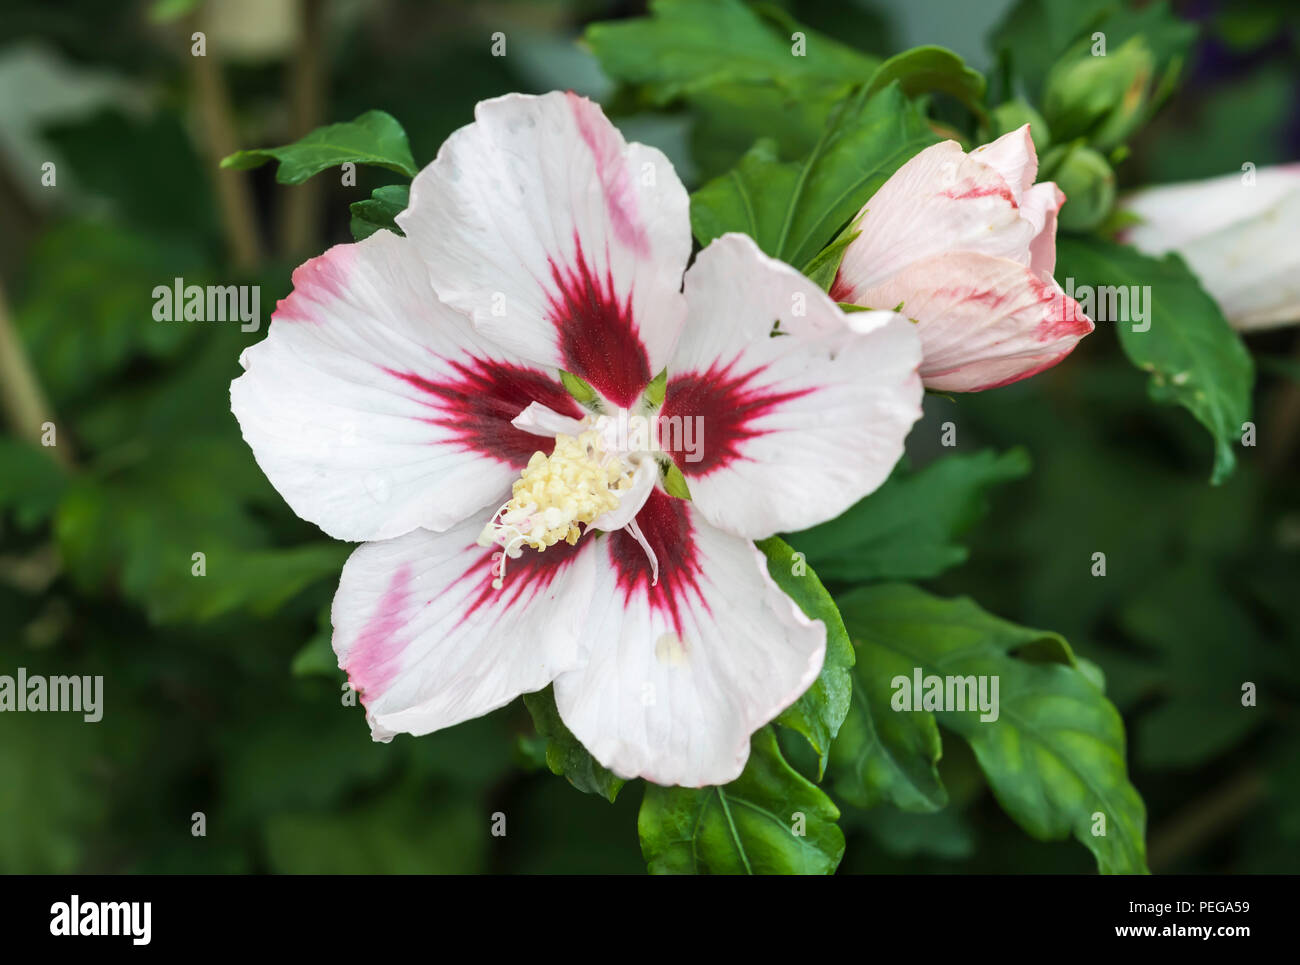 Hibiscus syriacus 'Hamabo' flower (Rose of Sharon, Rose Mallow, Tree Hollyhock) in Summer in West Sussex, England, UK. Stock Photo